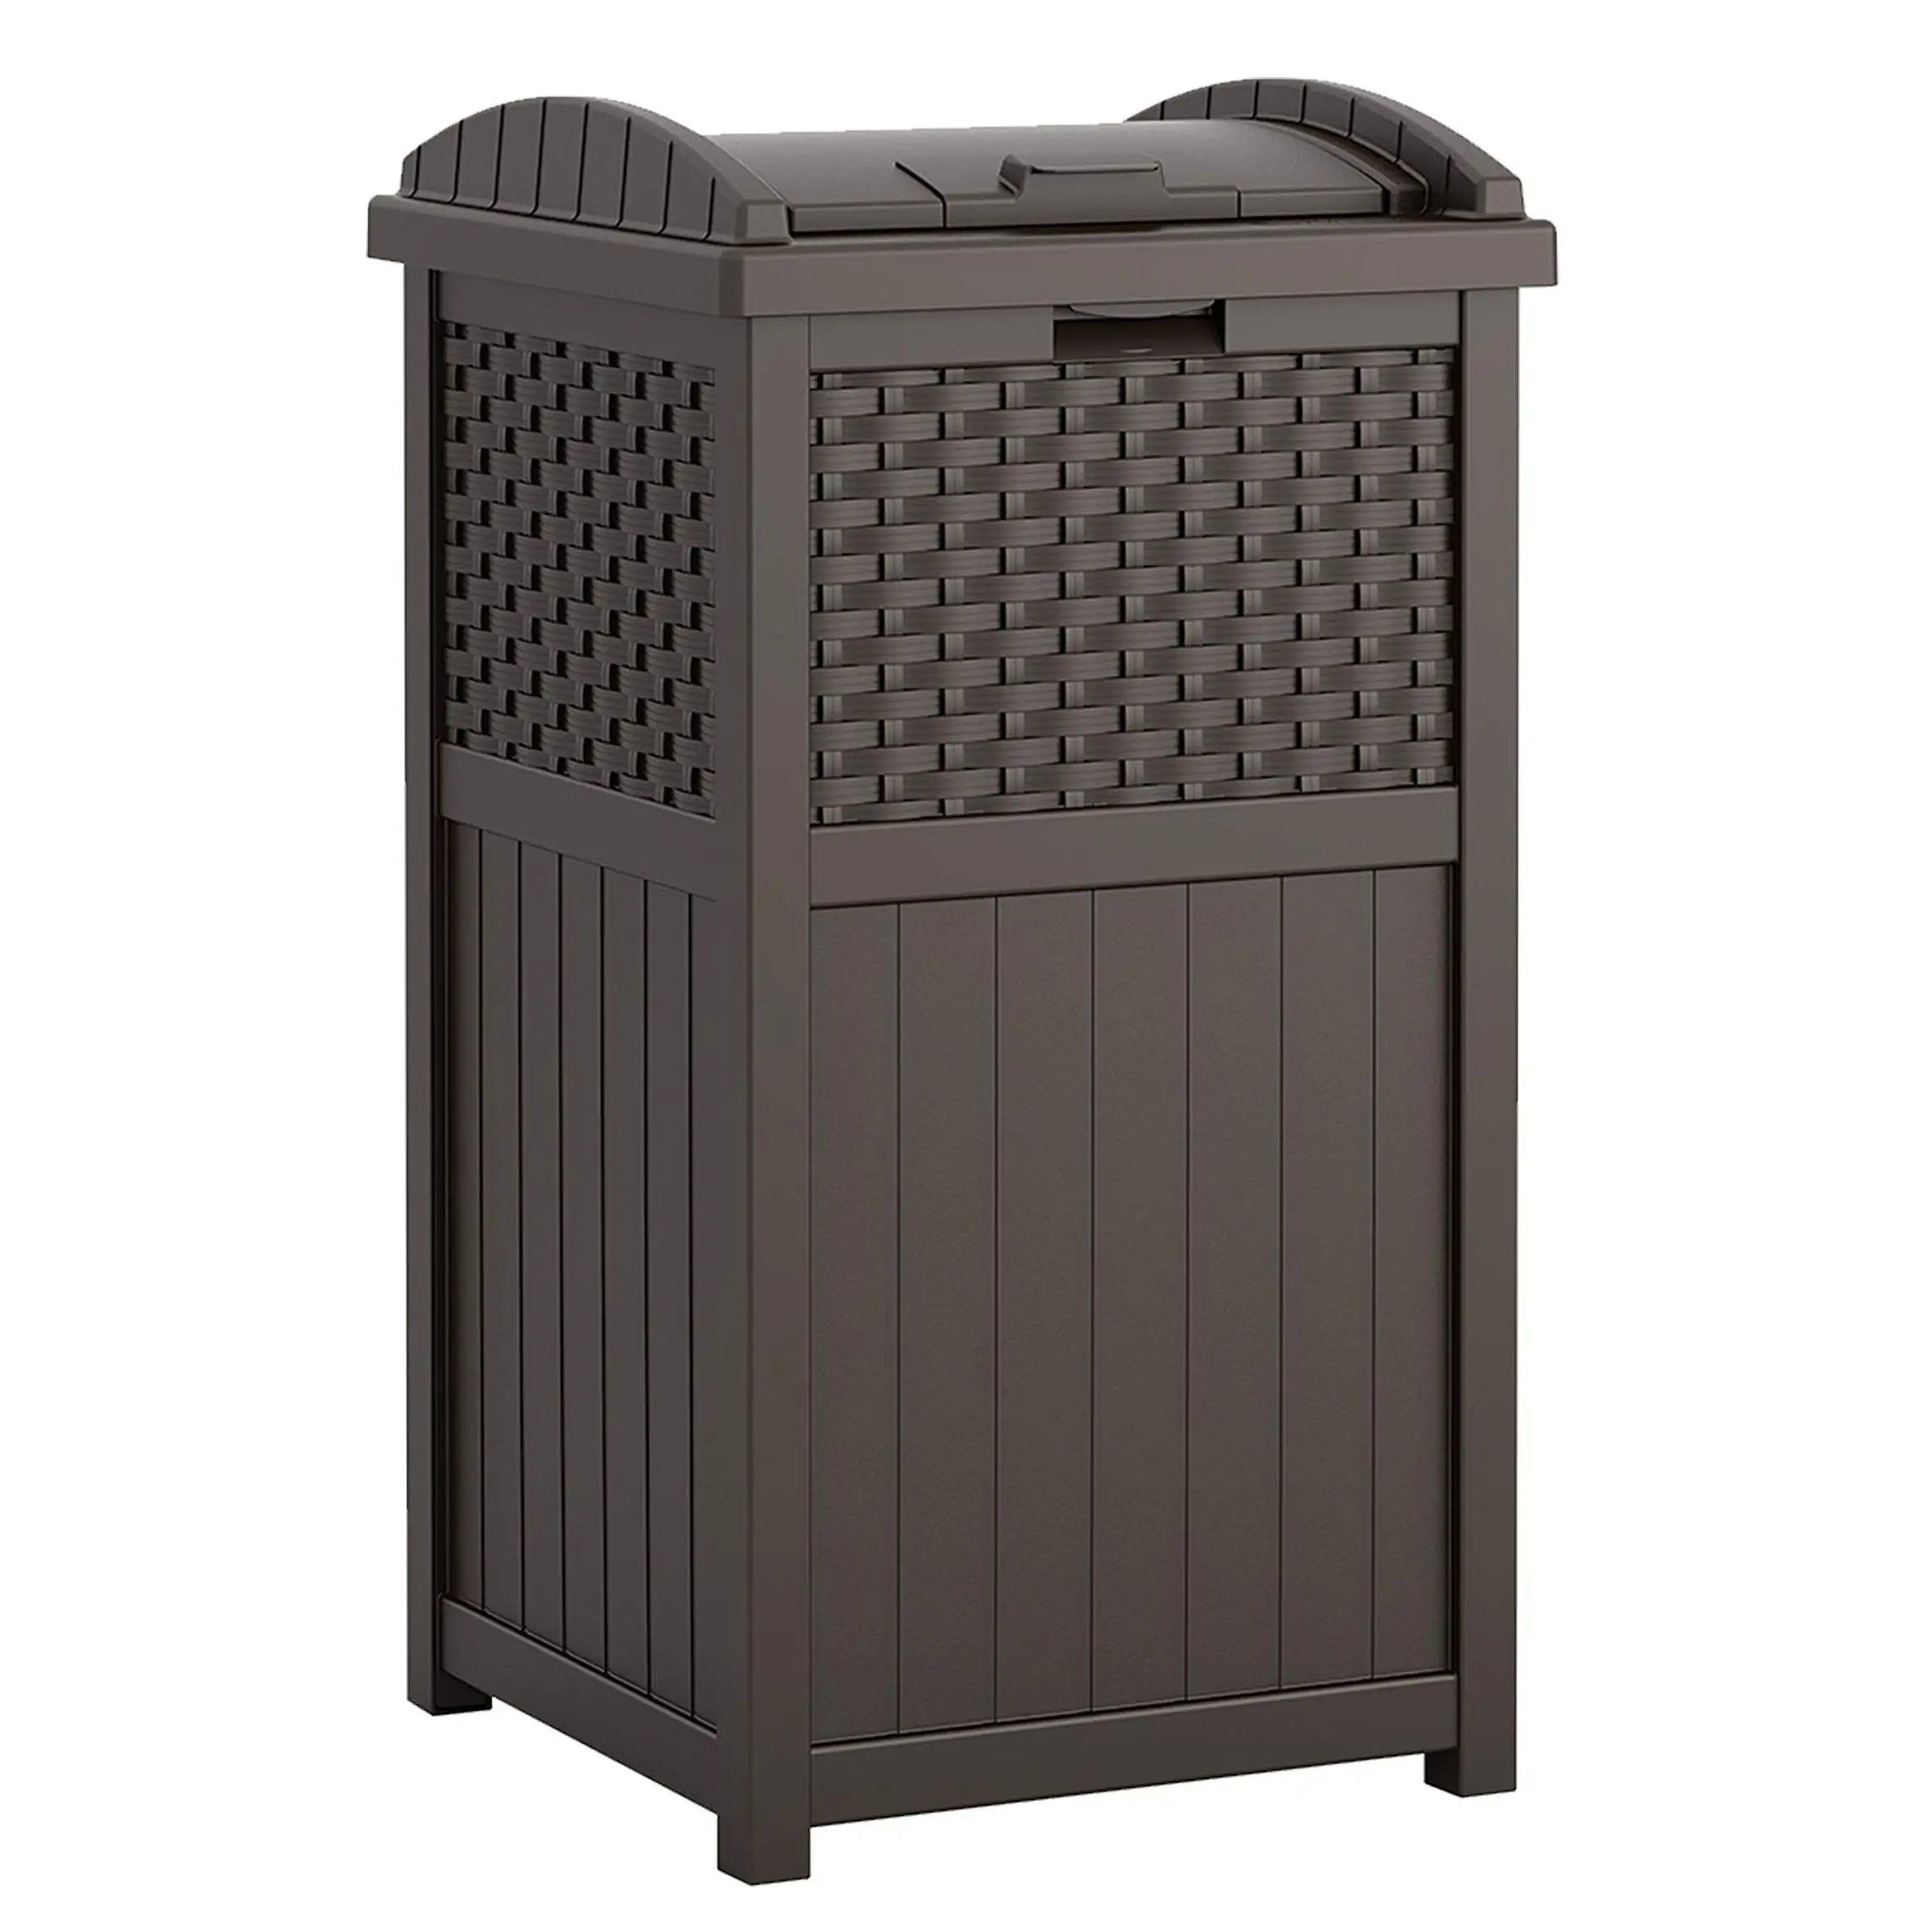 Resin Hideaway Patio Trash Can With Lid, Outdoor Waste Bins Use In Backyard, Deck, Or Patio (US Stock)